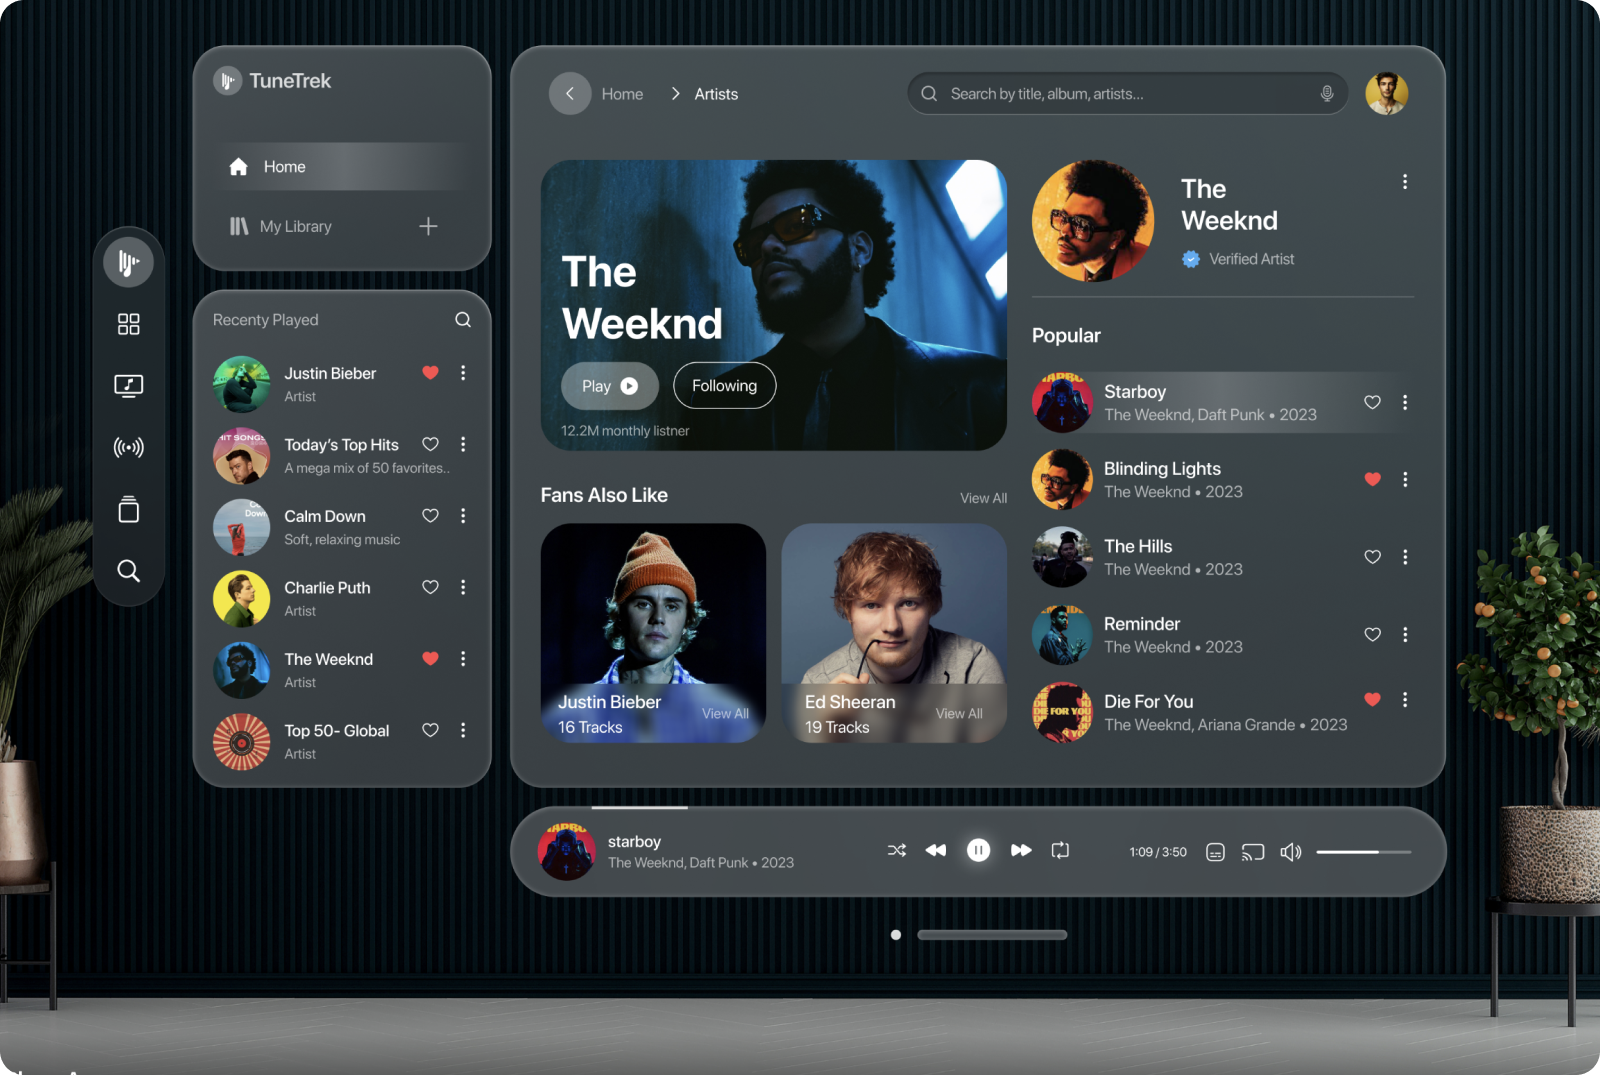 https://www.behance.net/gallery/192140185/TuneTrek-Vision-Pro-Music-Player-App?tracking_source=search_projects|vision+pro&l=42